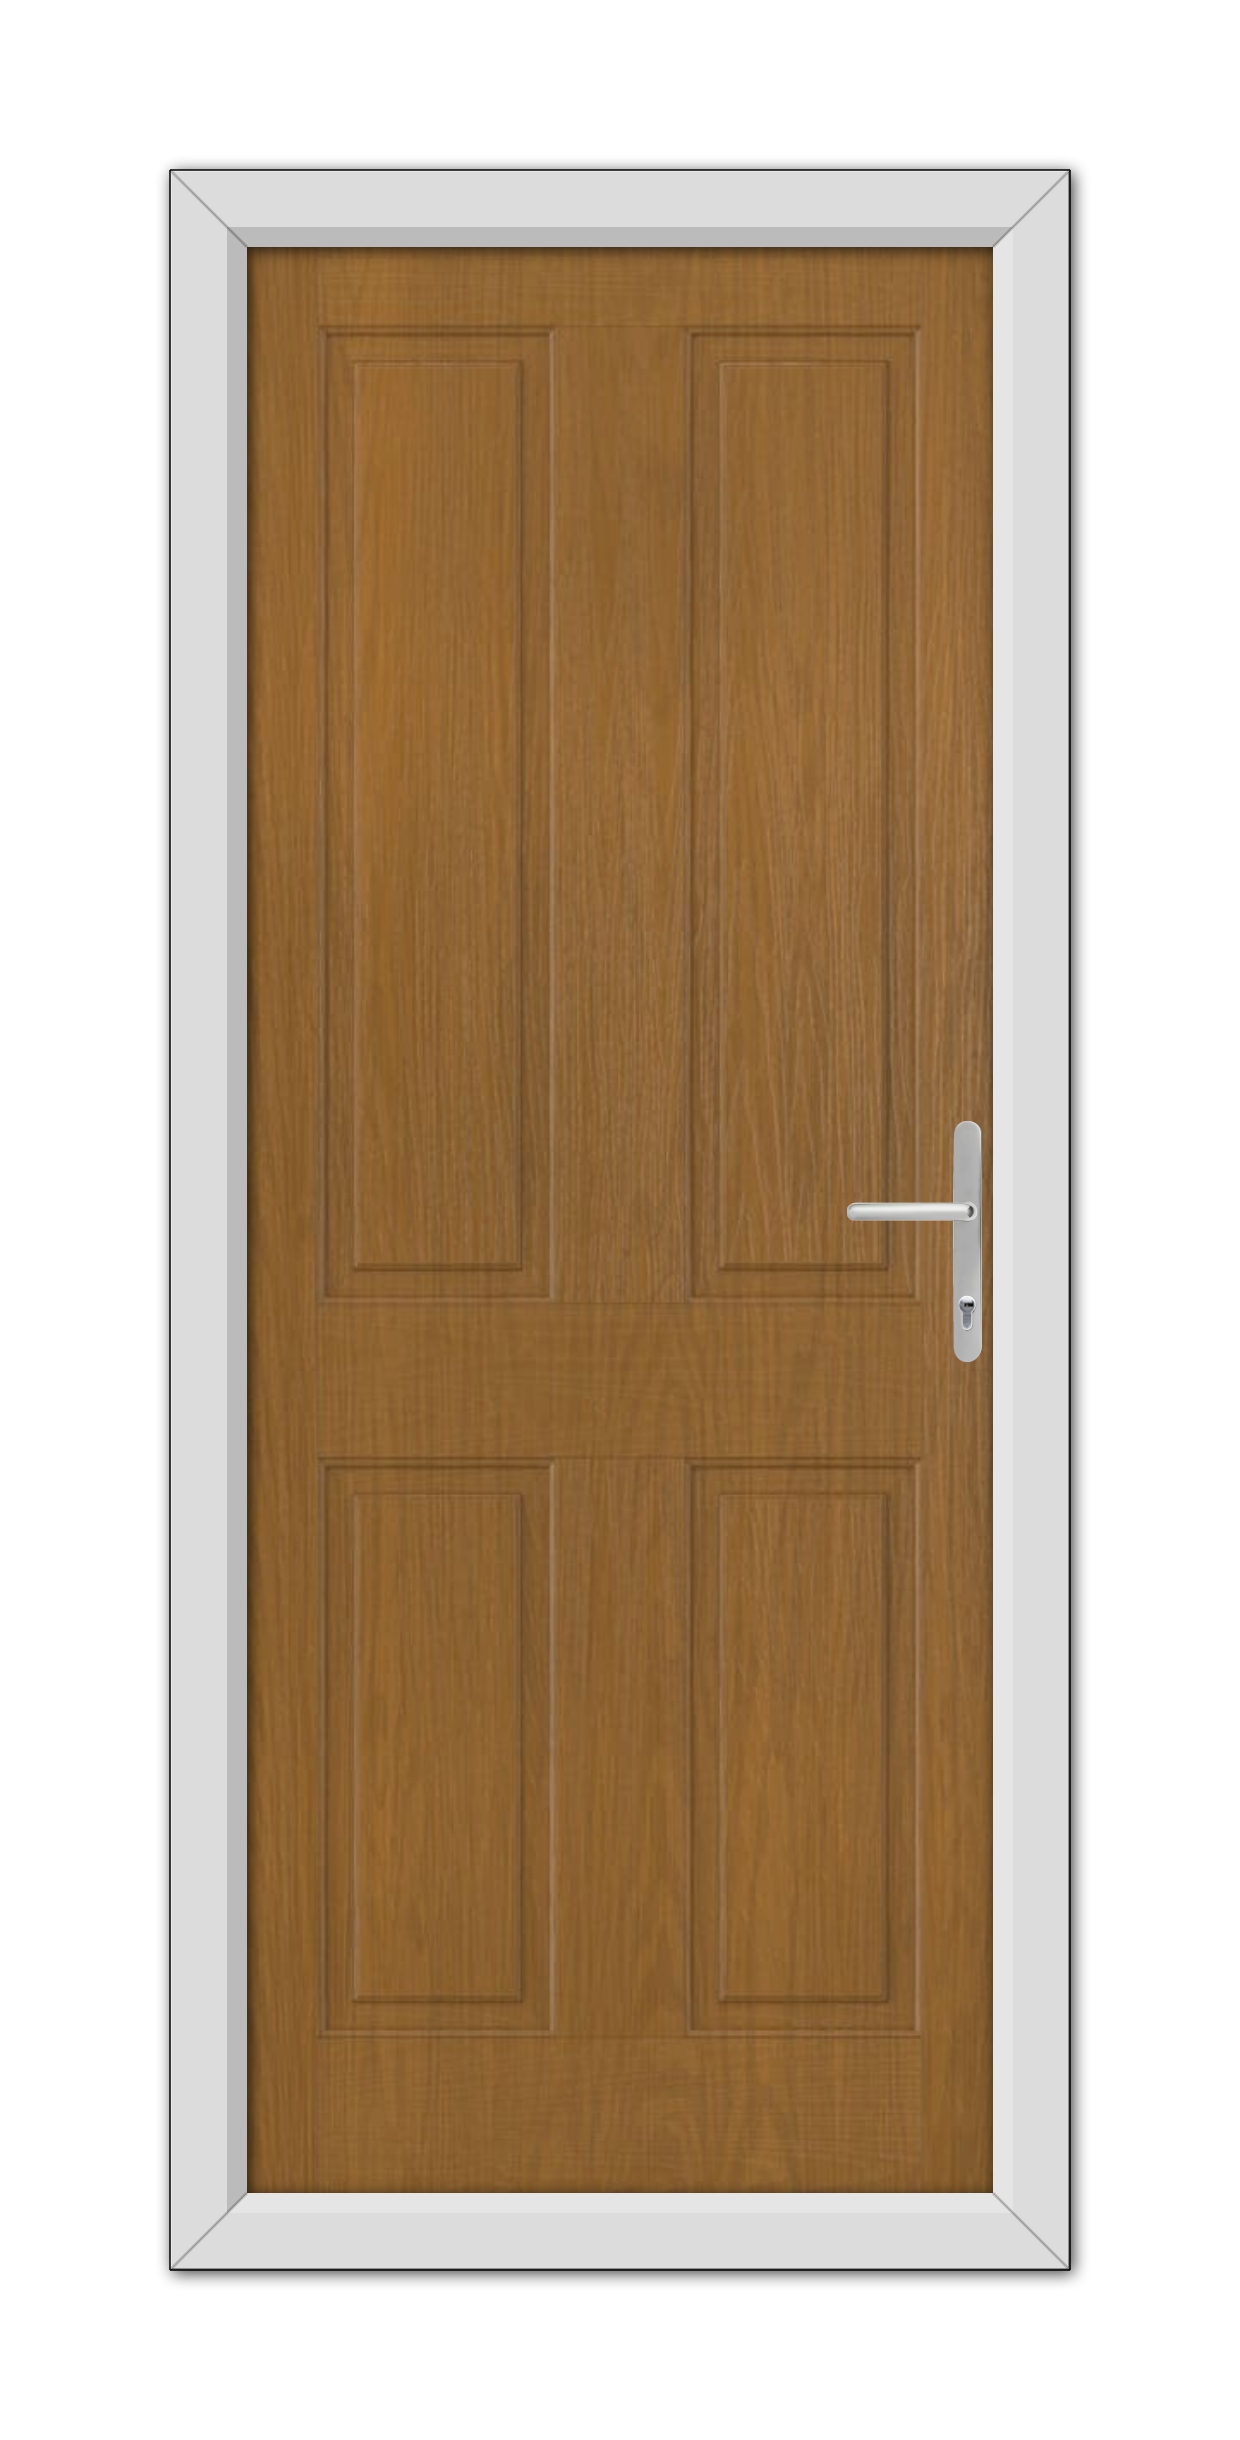 A Oak Whitmore Solid Composite Door 48mm Timber Core with a white frame and a metallic handle on the right side.